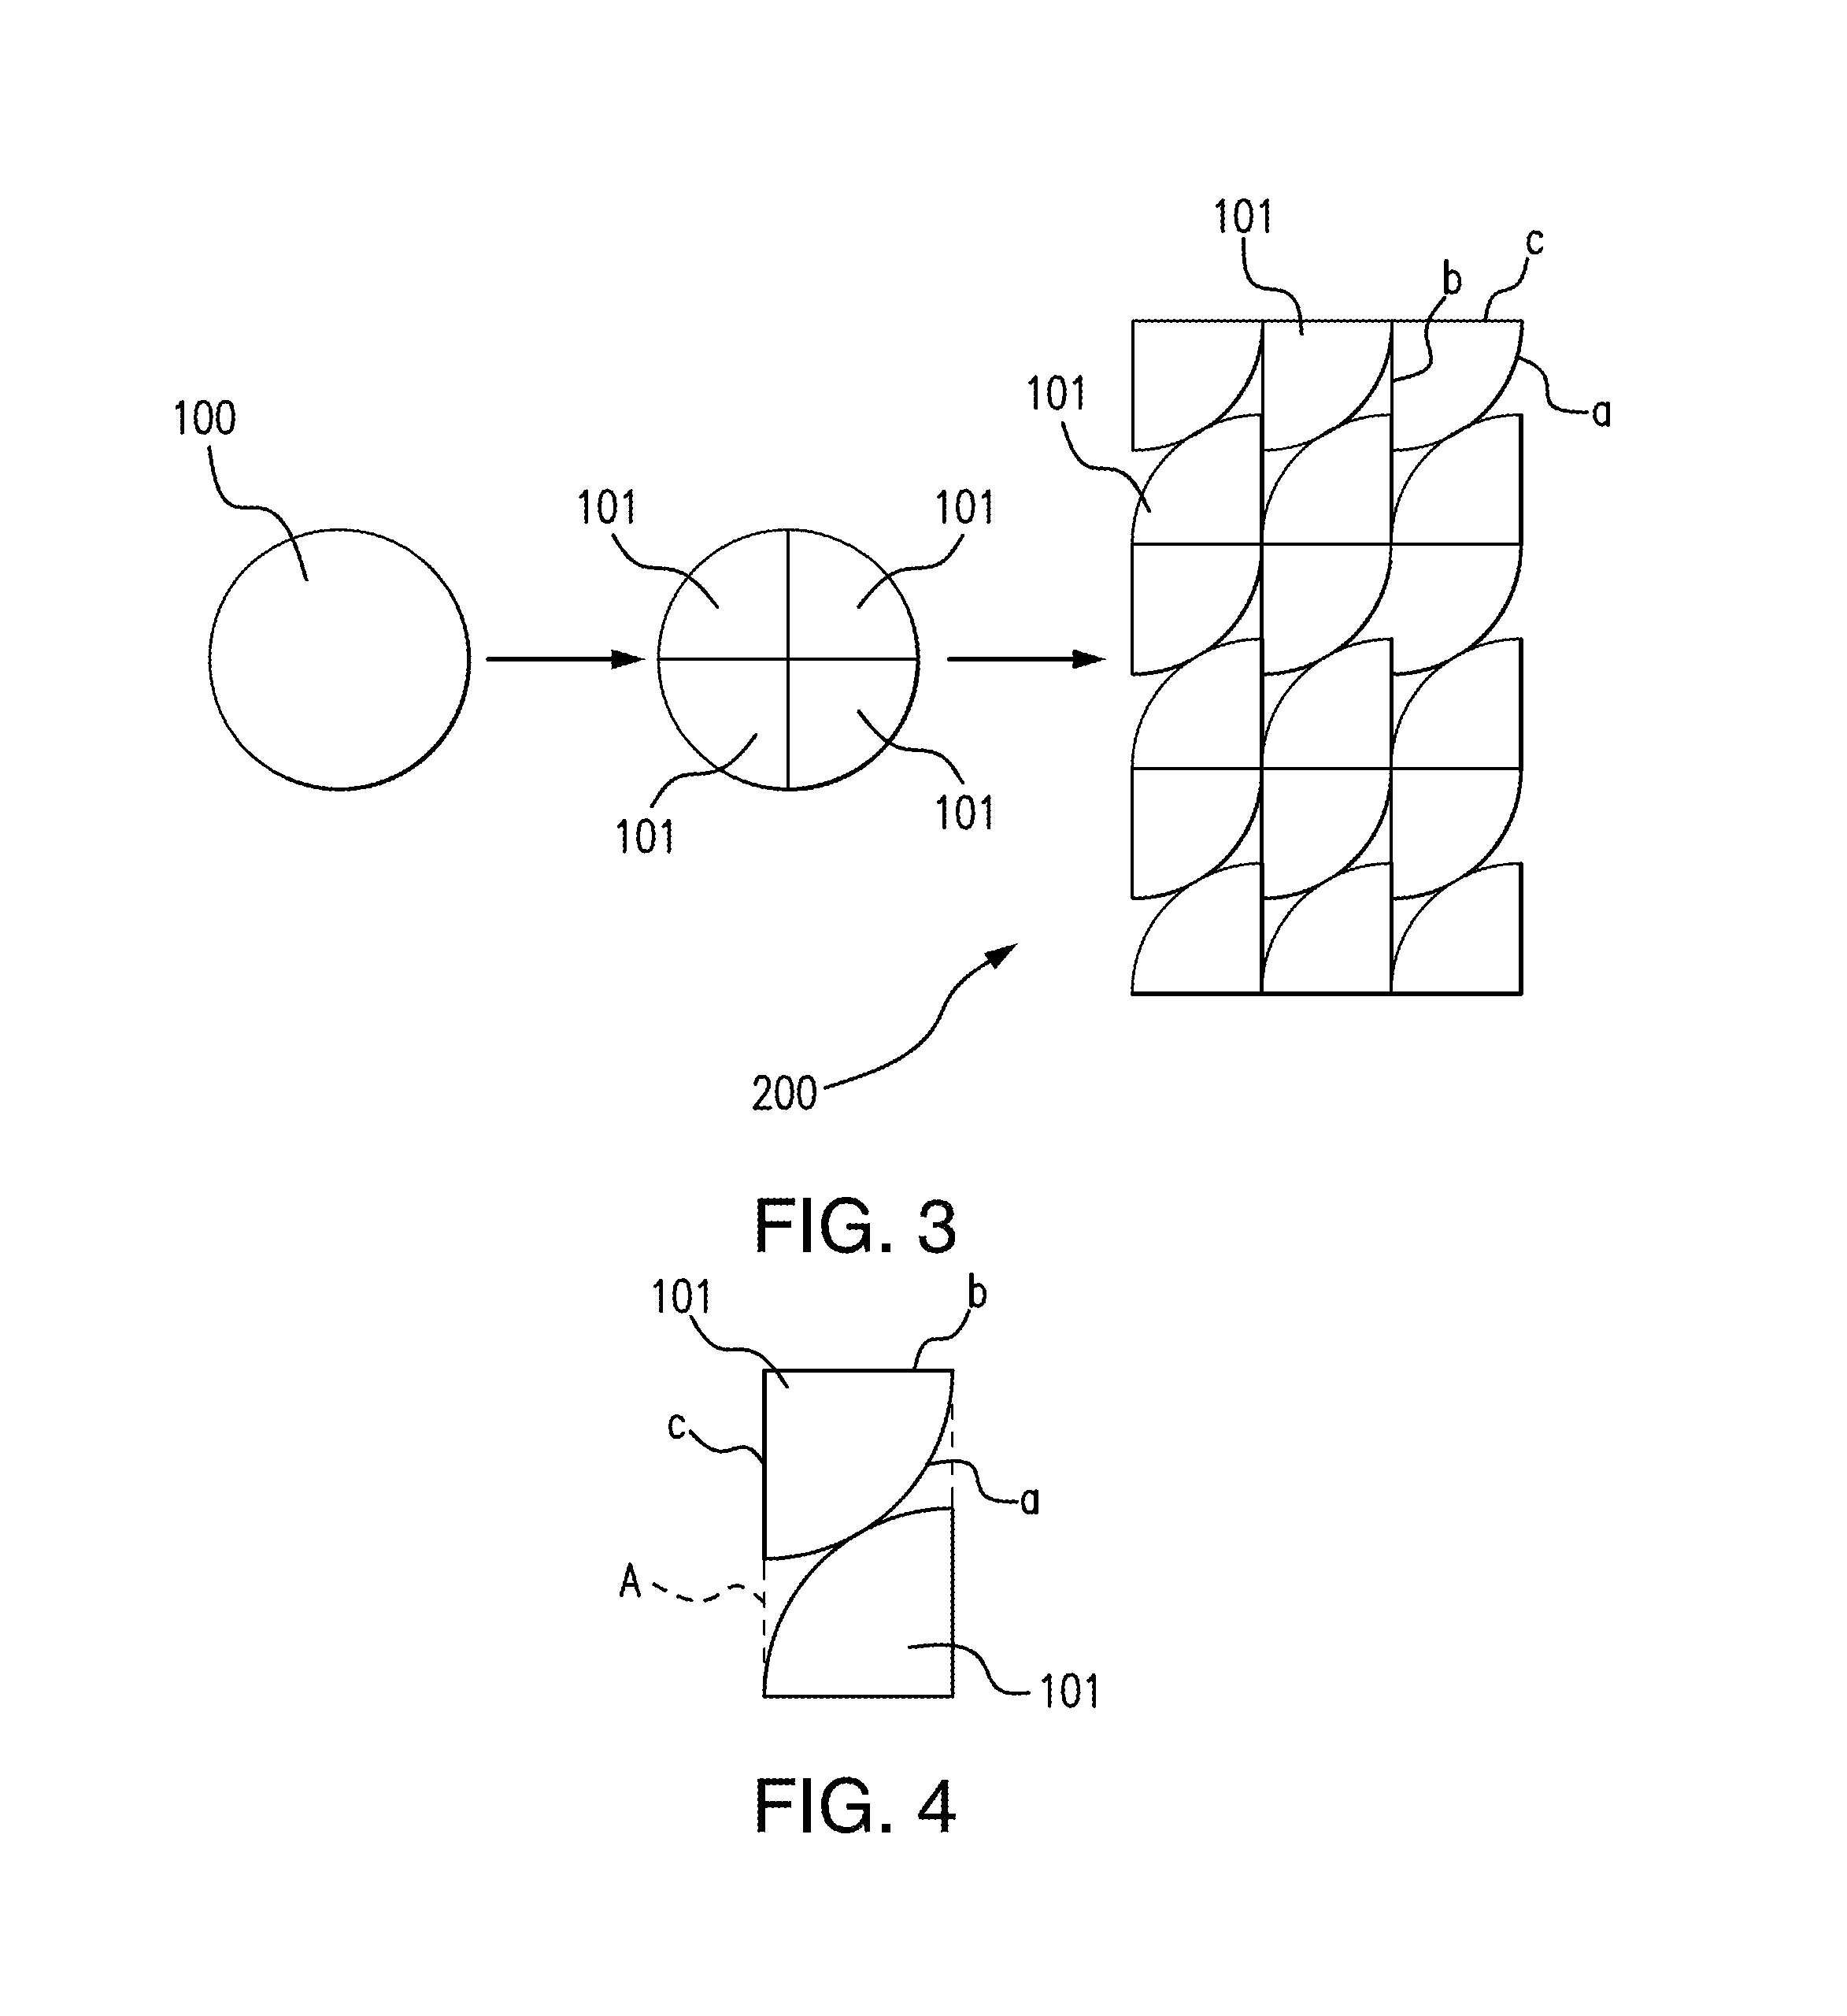 Solar cell assembly comprising solar cells shaped as a portion of a circle